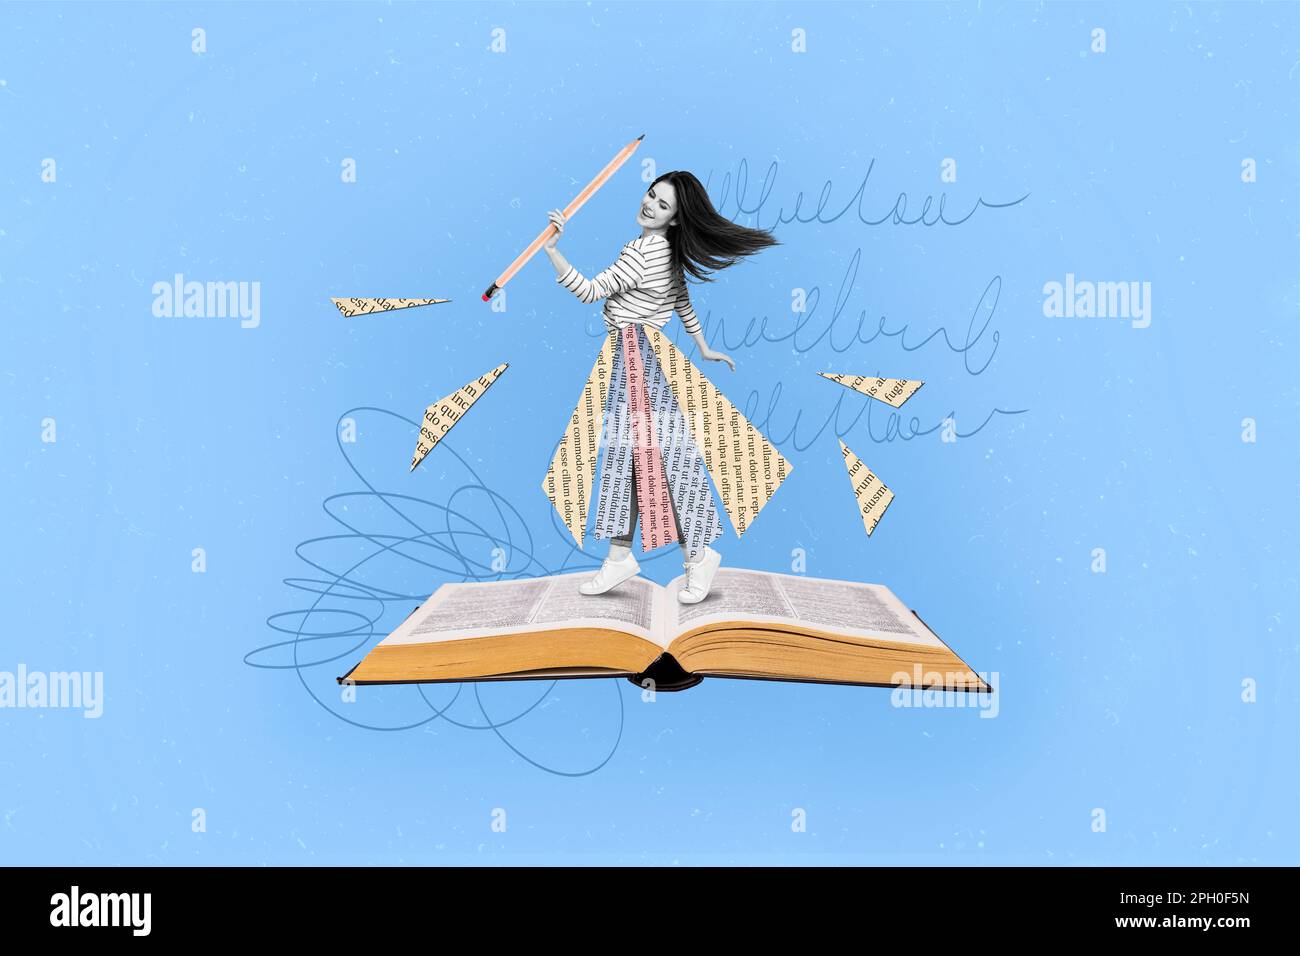 Creative surreal collage of positive geek young lady dancing on open book page holding pencil prepare academic courses lecture Stock Photo